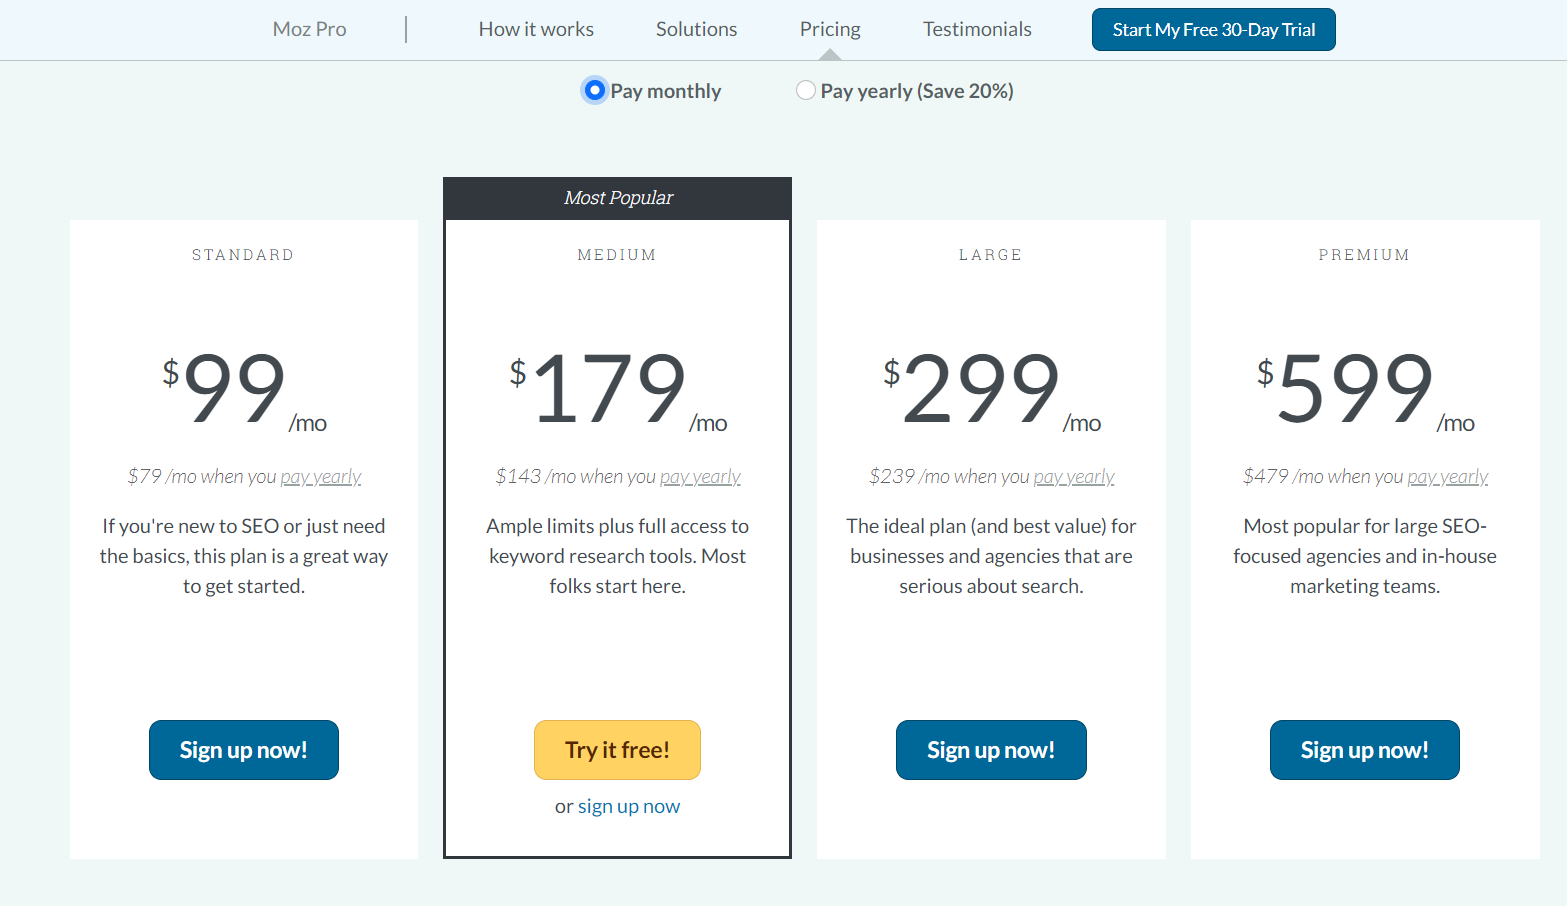 Plan and price for MOZ 